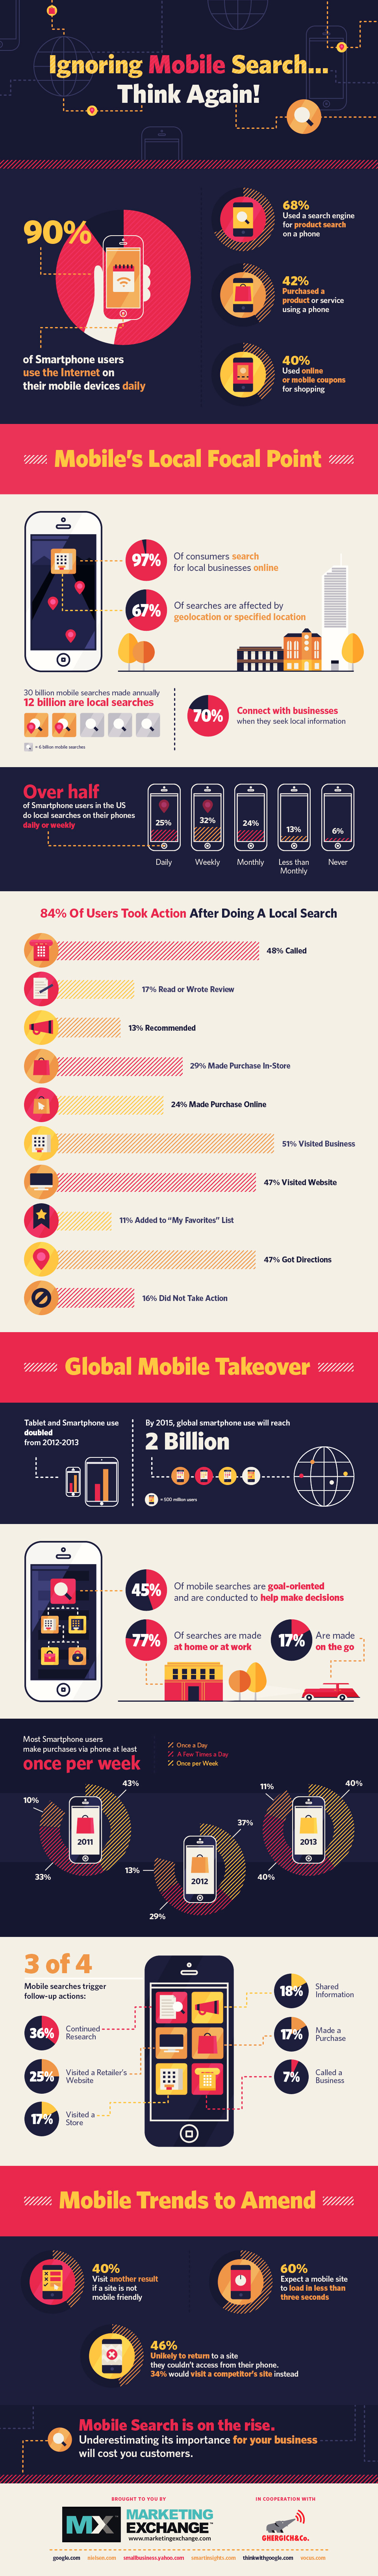 Mobile Trends Infographic